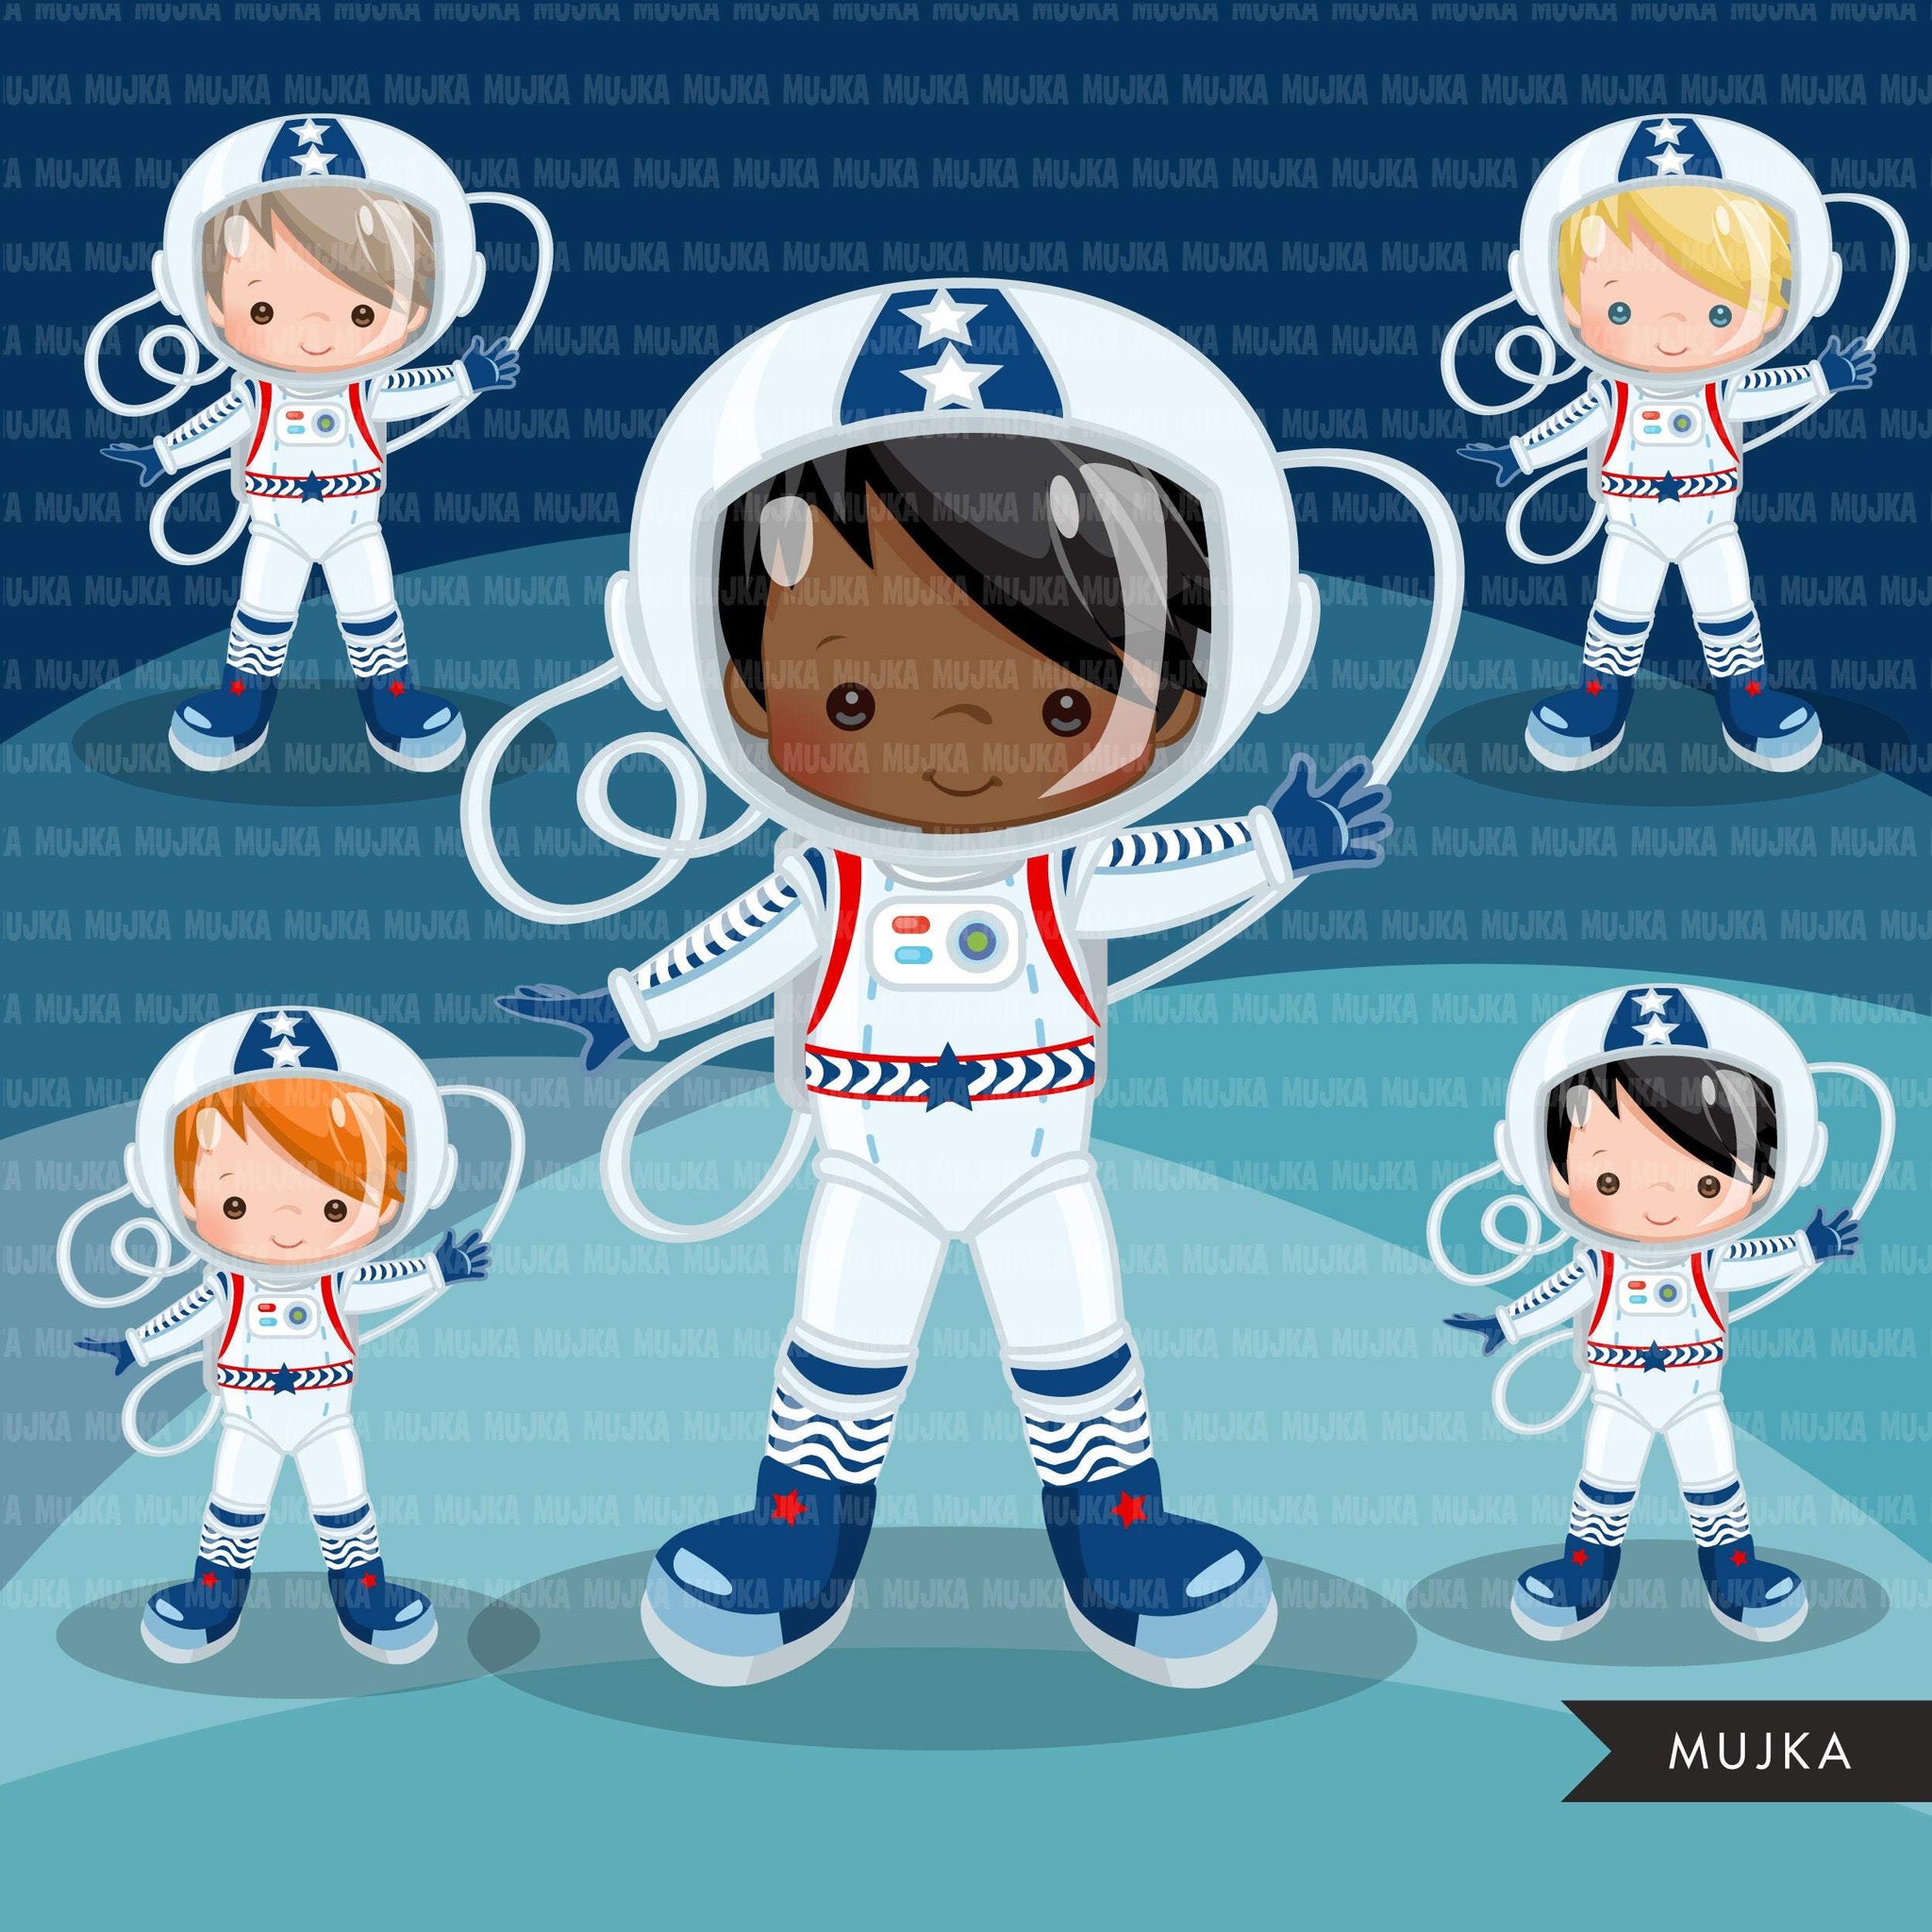 Space solar system clipart with boy and girl astronauts & cute planets